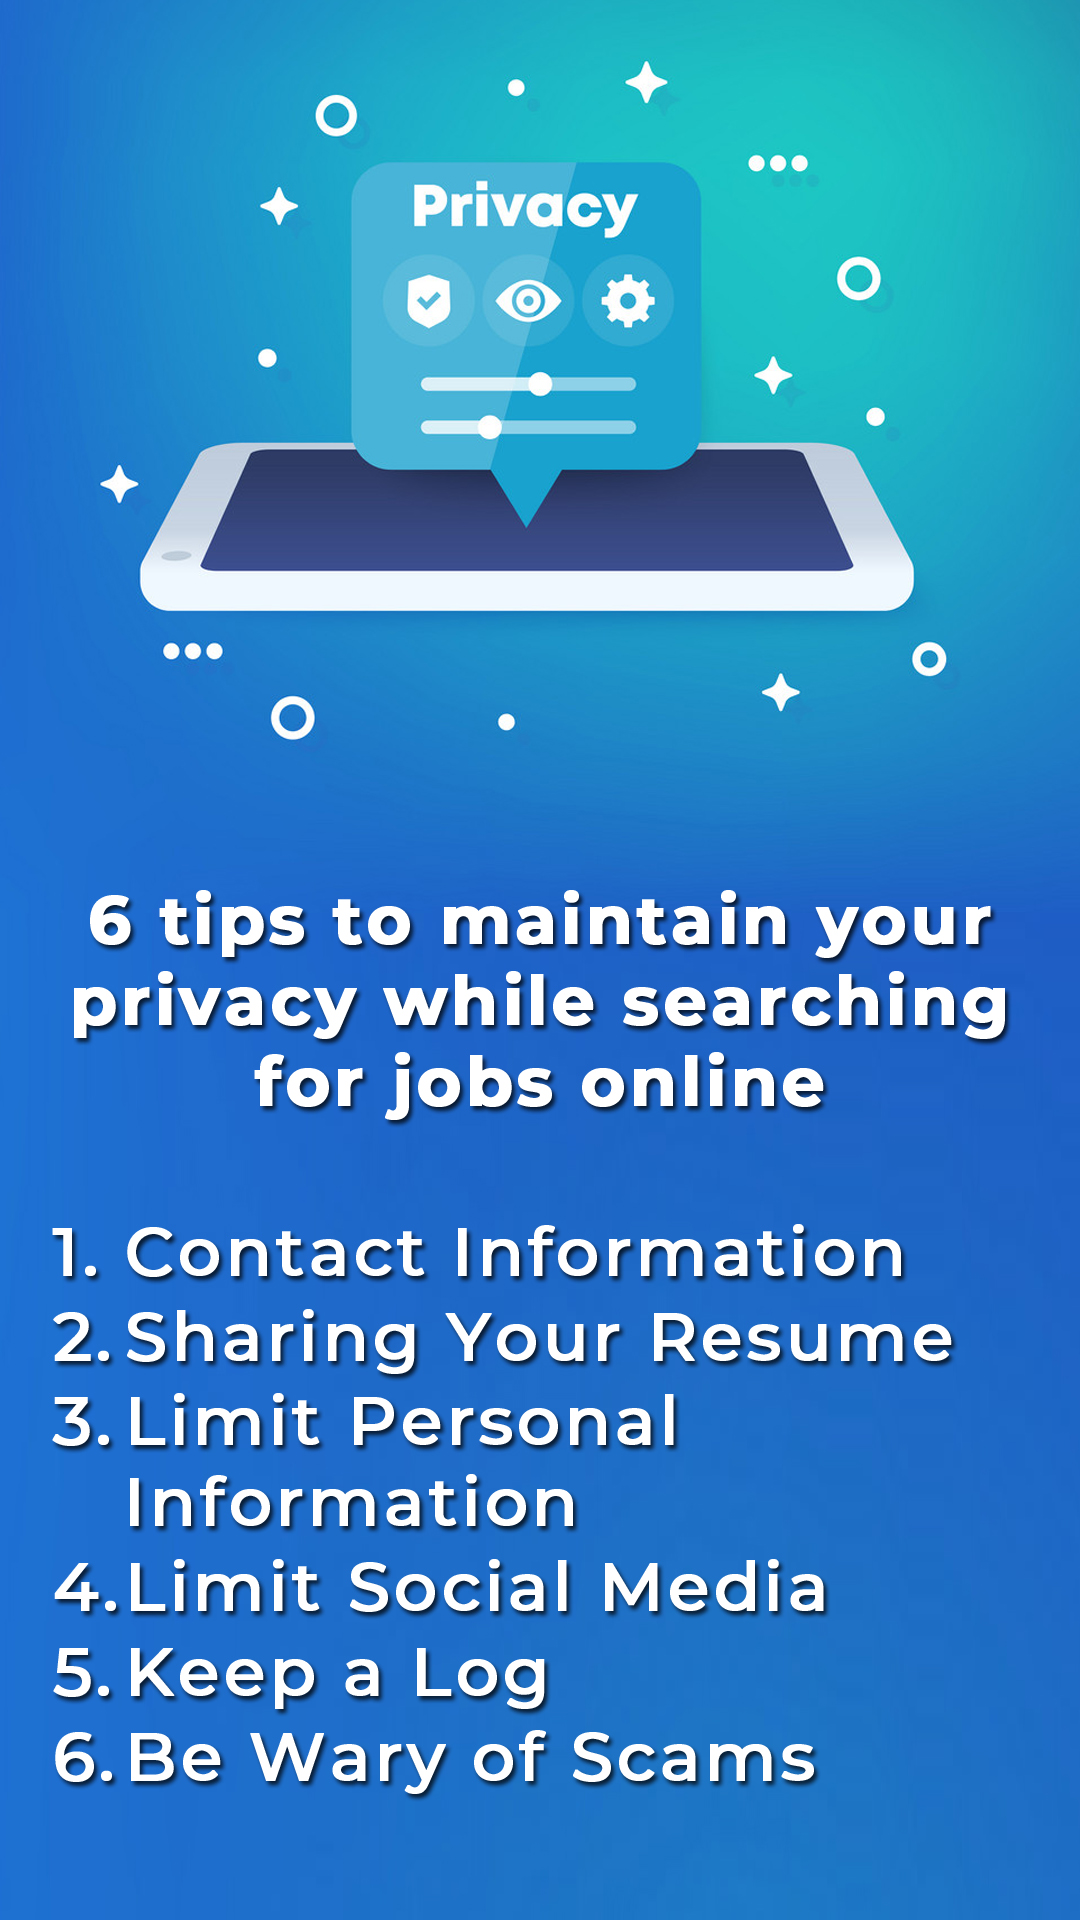 6 Tips To Maintain Your Privacy While Searching For Jobs Online